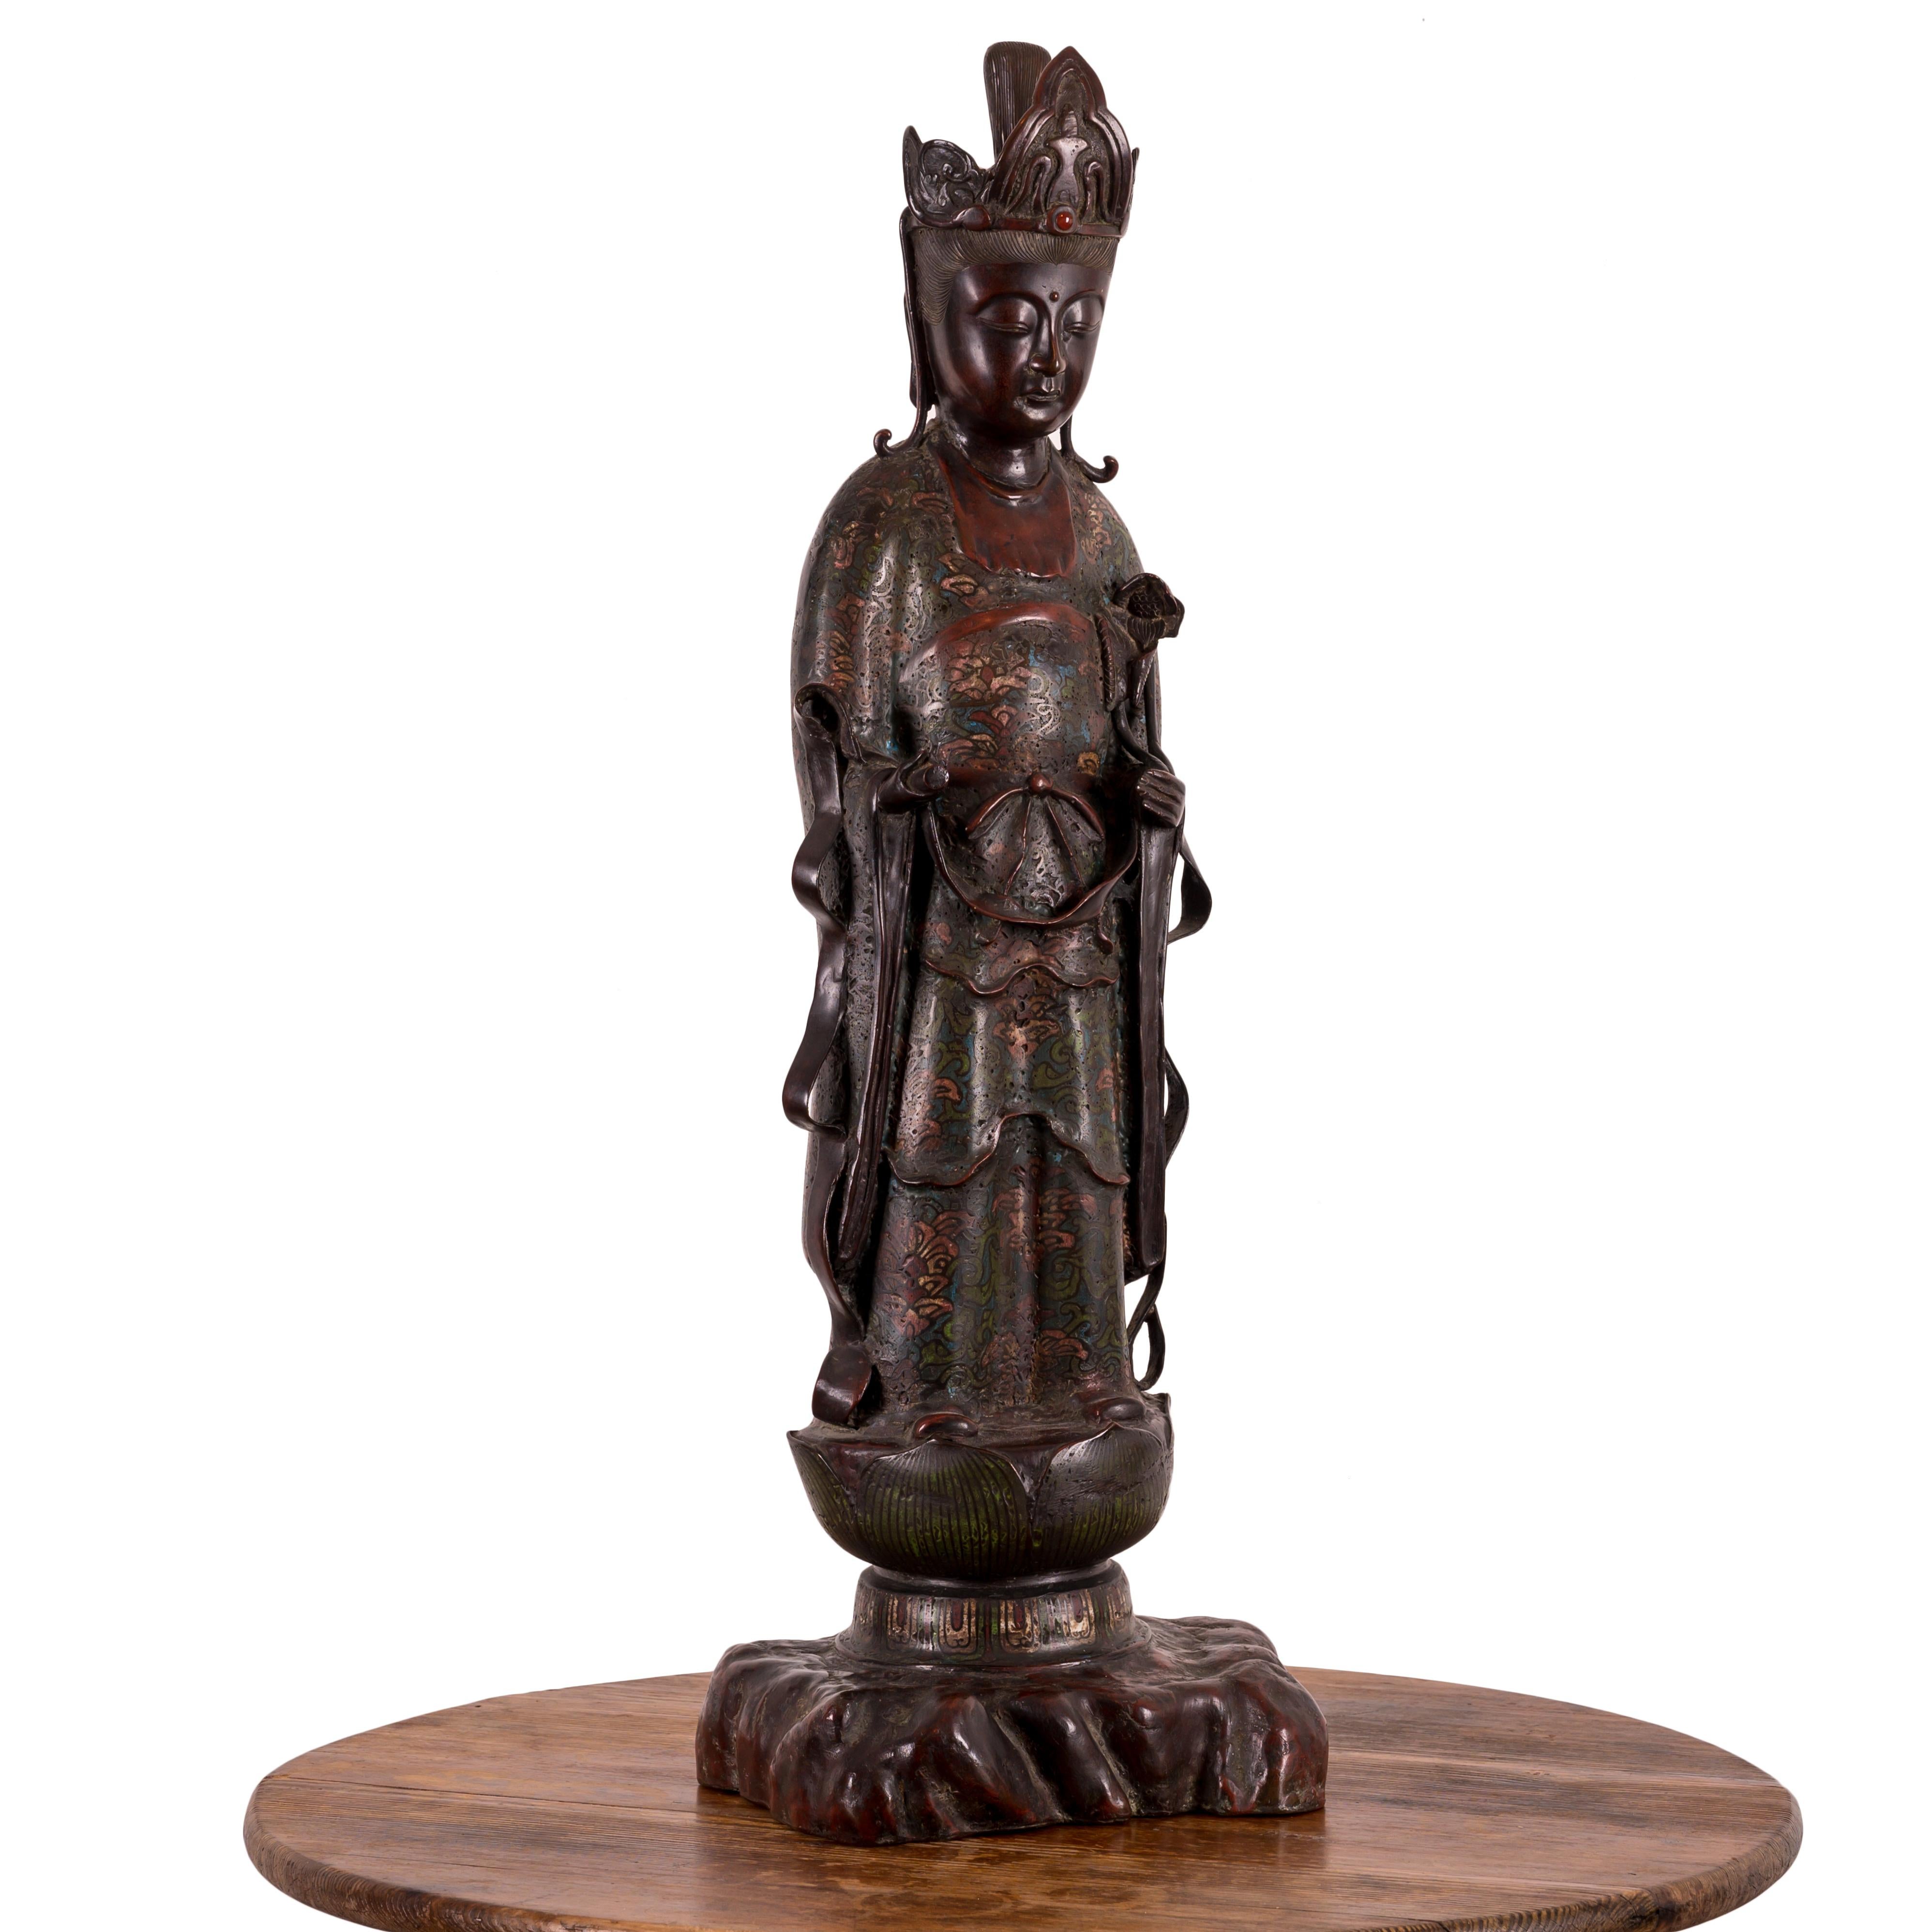 Japanese champlevé bronze Kannon Bodhisattva Avalokiteshvara figure, Meiji period.

9 ¾ inches wide by 8 inches deep by 29 ½ inches tall